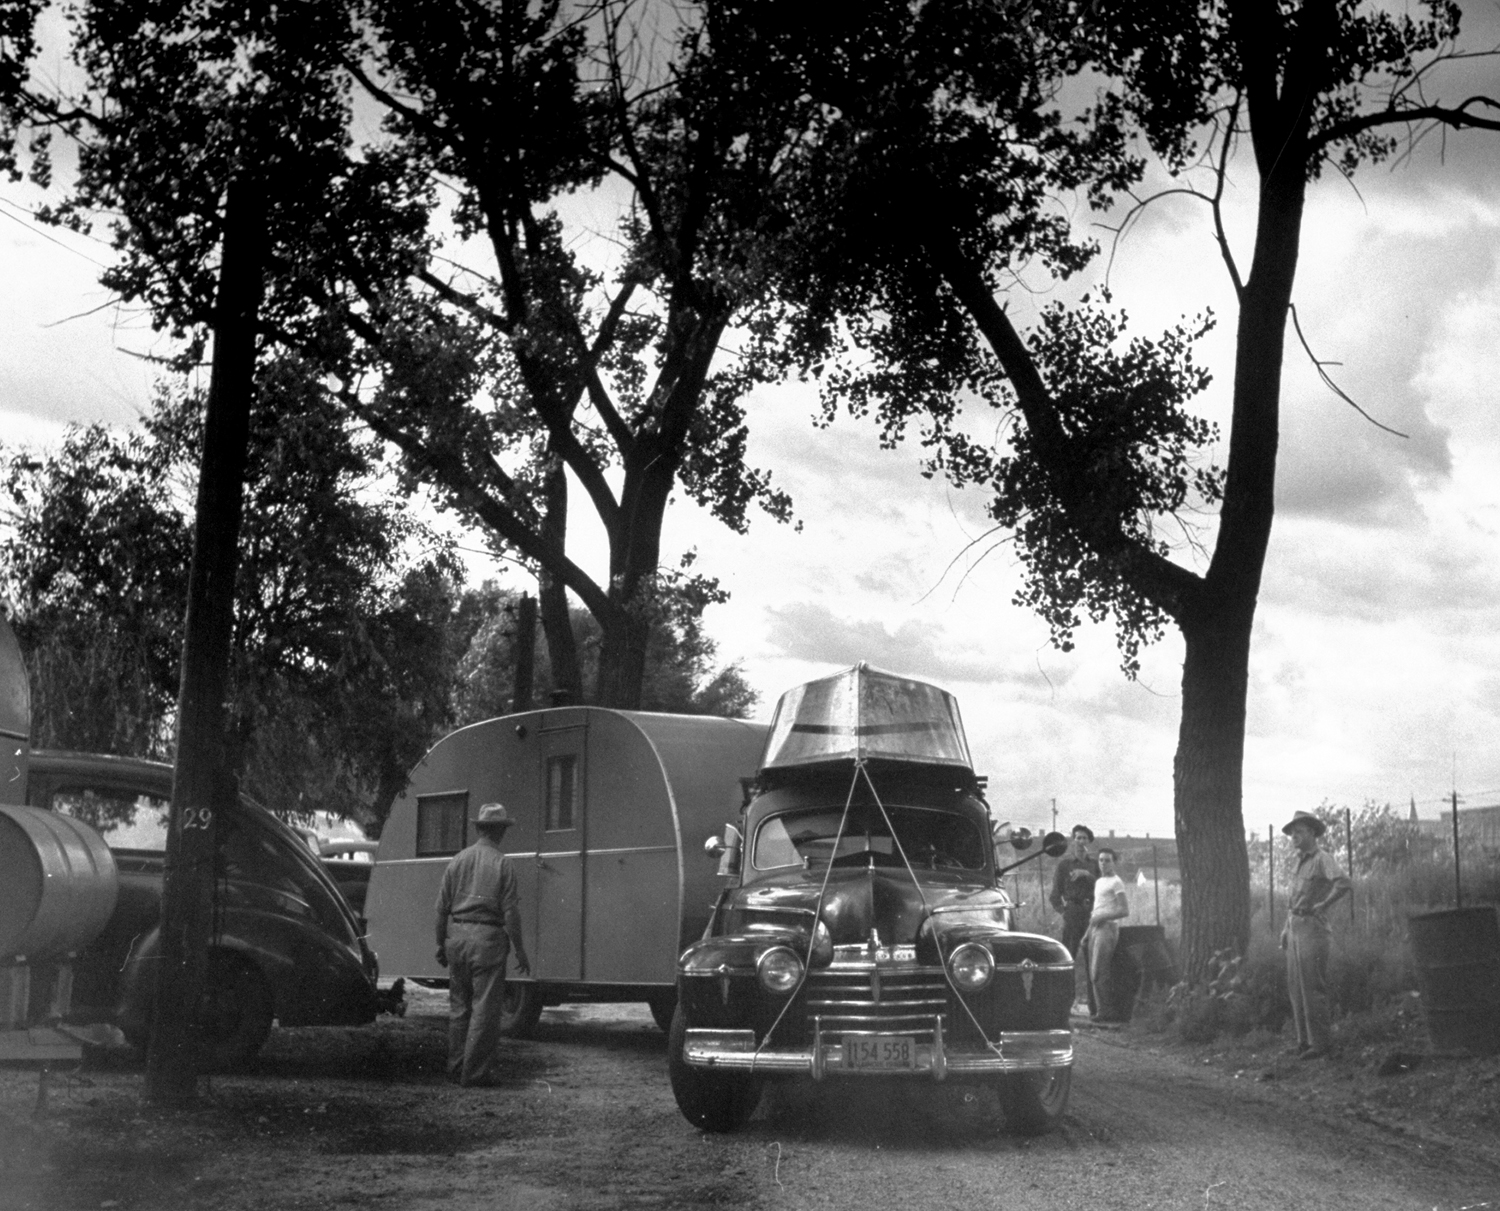 Cars pulling out of trailer camp onto Route 30, Nebraska, 1948.